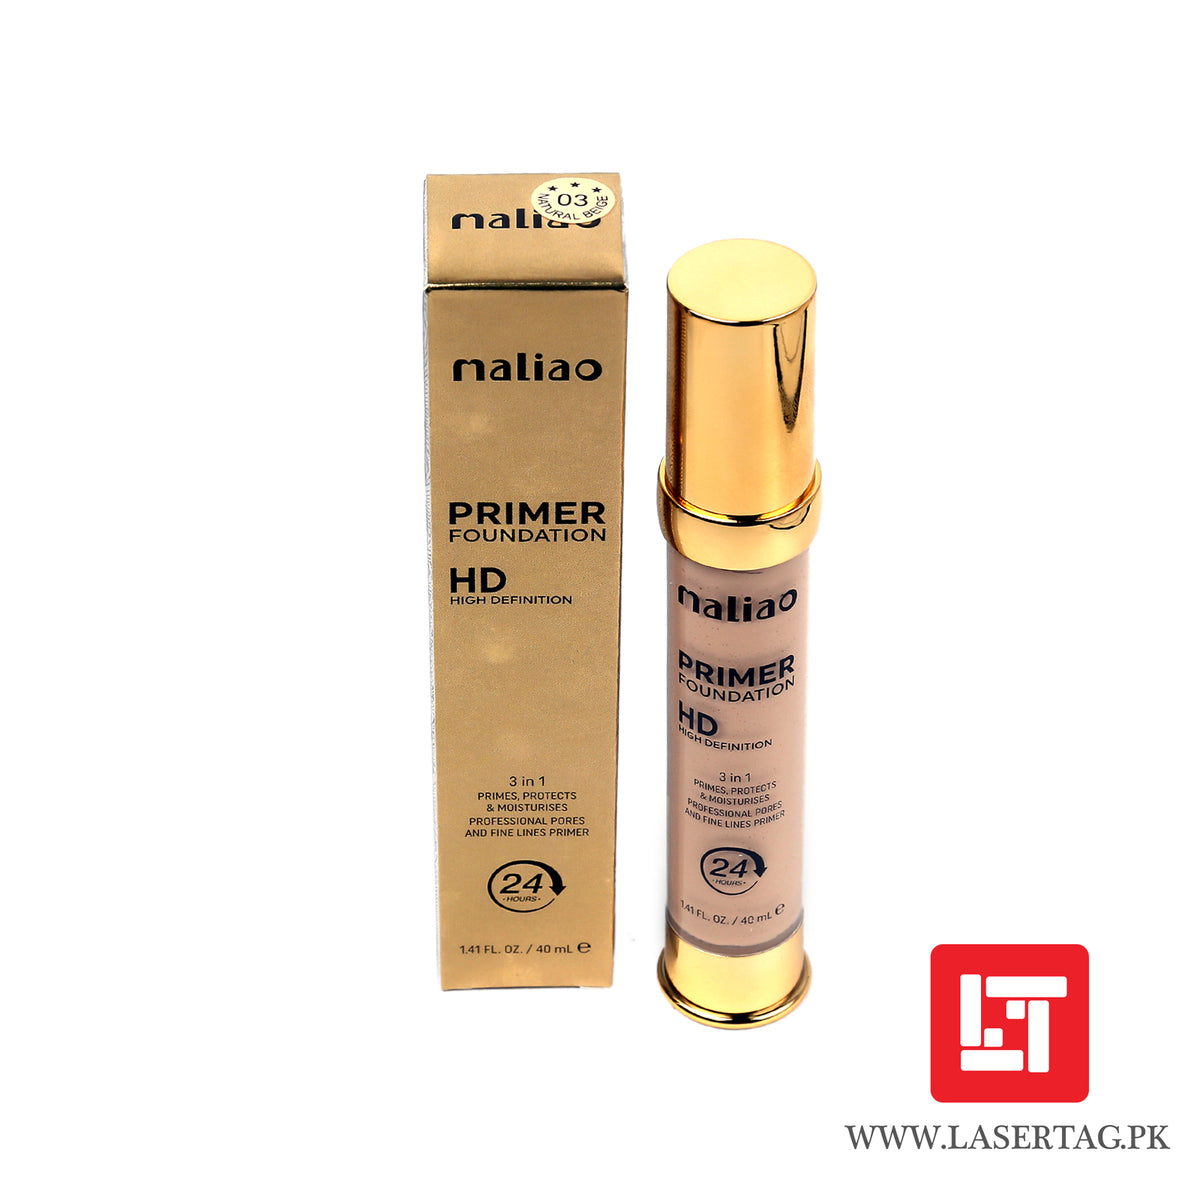 Maliao Primer Foundation HD High Definition 3 In 1 PRimes, Protects &amp; Moisturises Natural Beige M175-03 40ml freeshipping - lasertag.pk